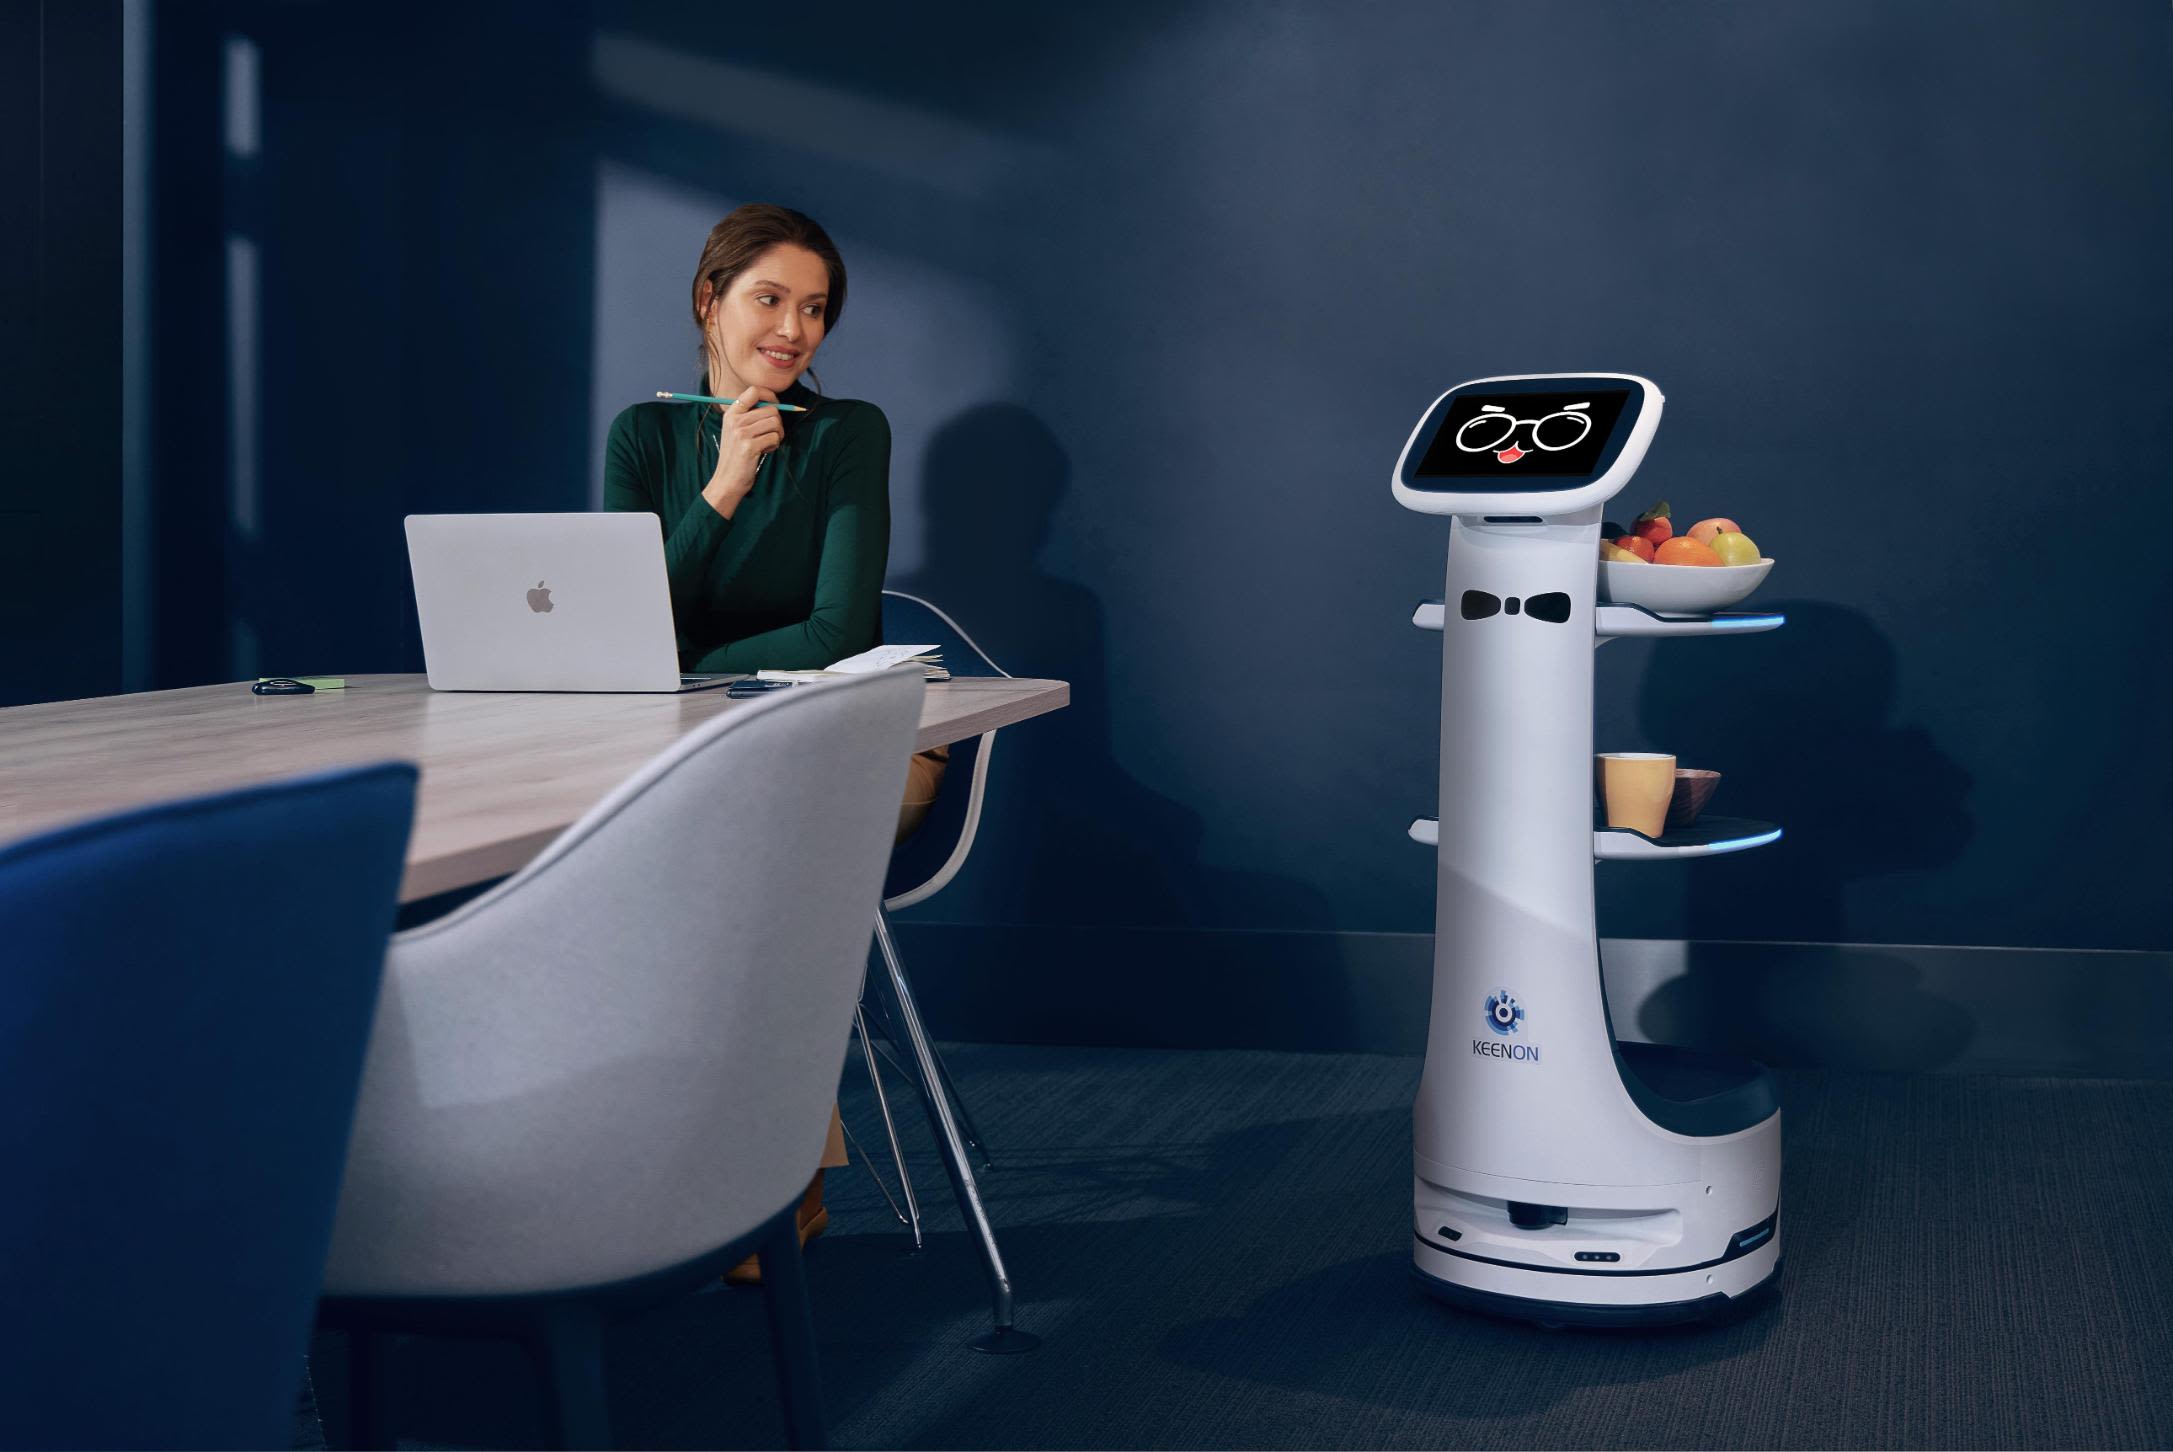 <strong>Smart waiters:</strong> Based in Shanghai, China, Keenon has been building AI-powered service robots since 2010 that assist with food delivery and plate collection. Its robots have been deployed in over 600 cities around the world, and it has <a href="index.php?page=&url=https%3A%2F%2Fwww.keenon.com%2FEN%2FAbout.html" target="_blank" target="_blank">33,000 robots</a> active daily. 